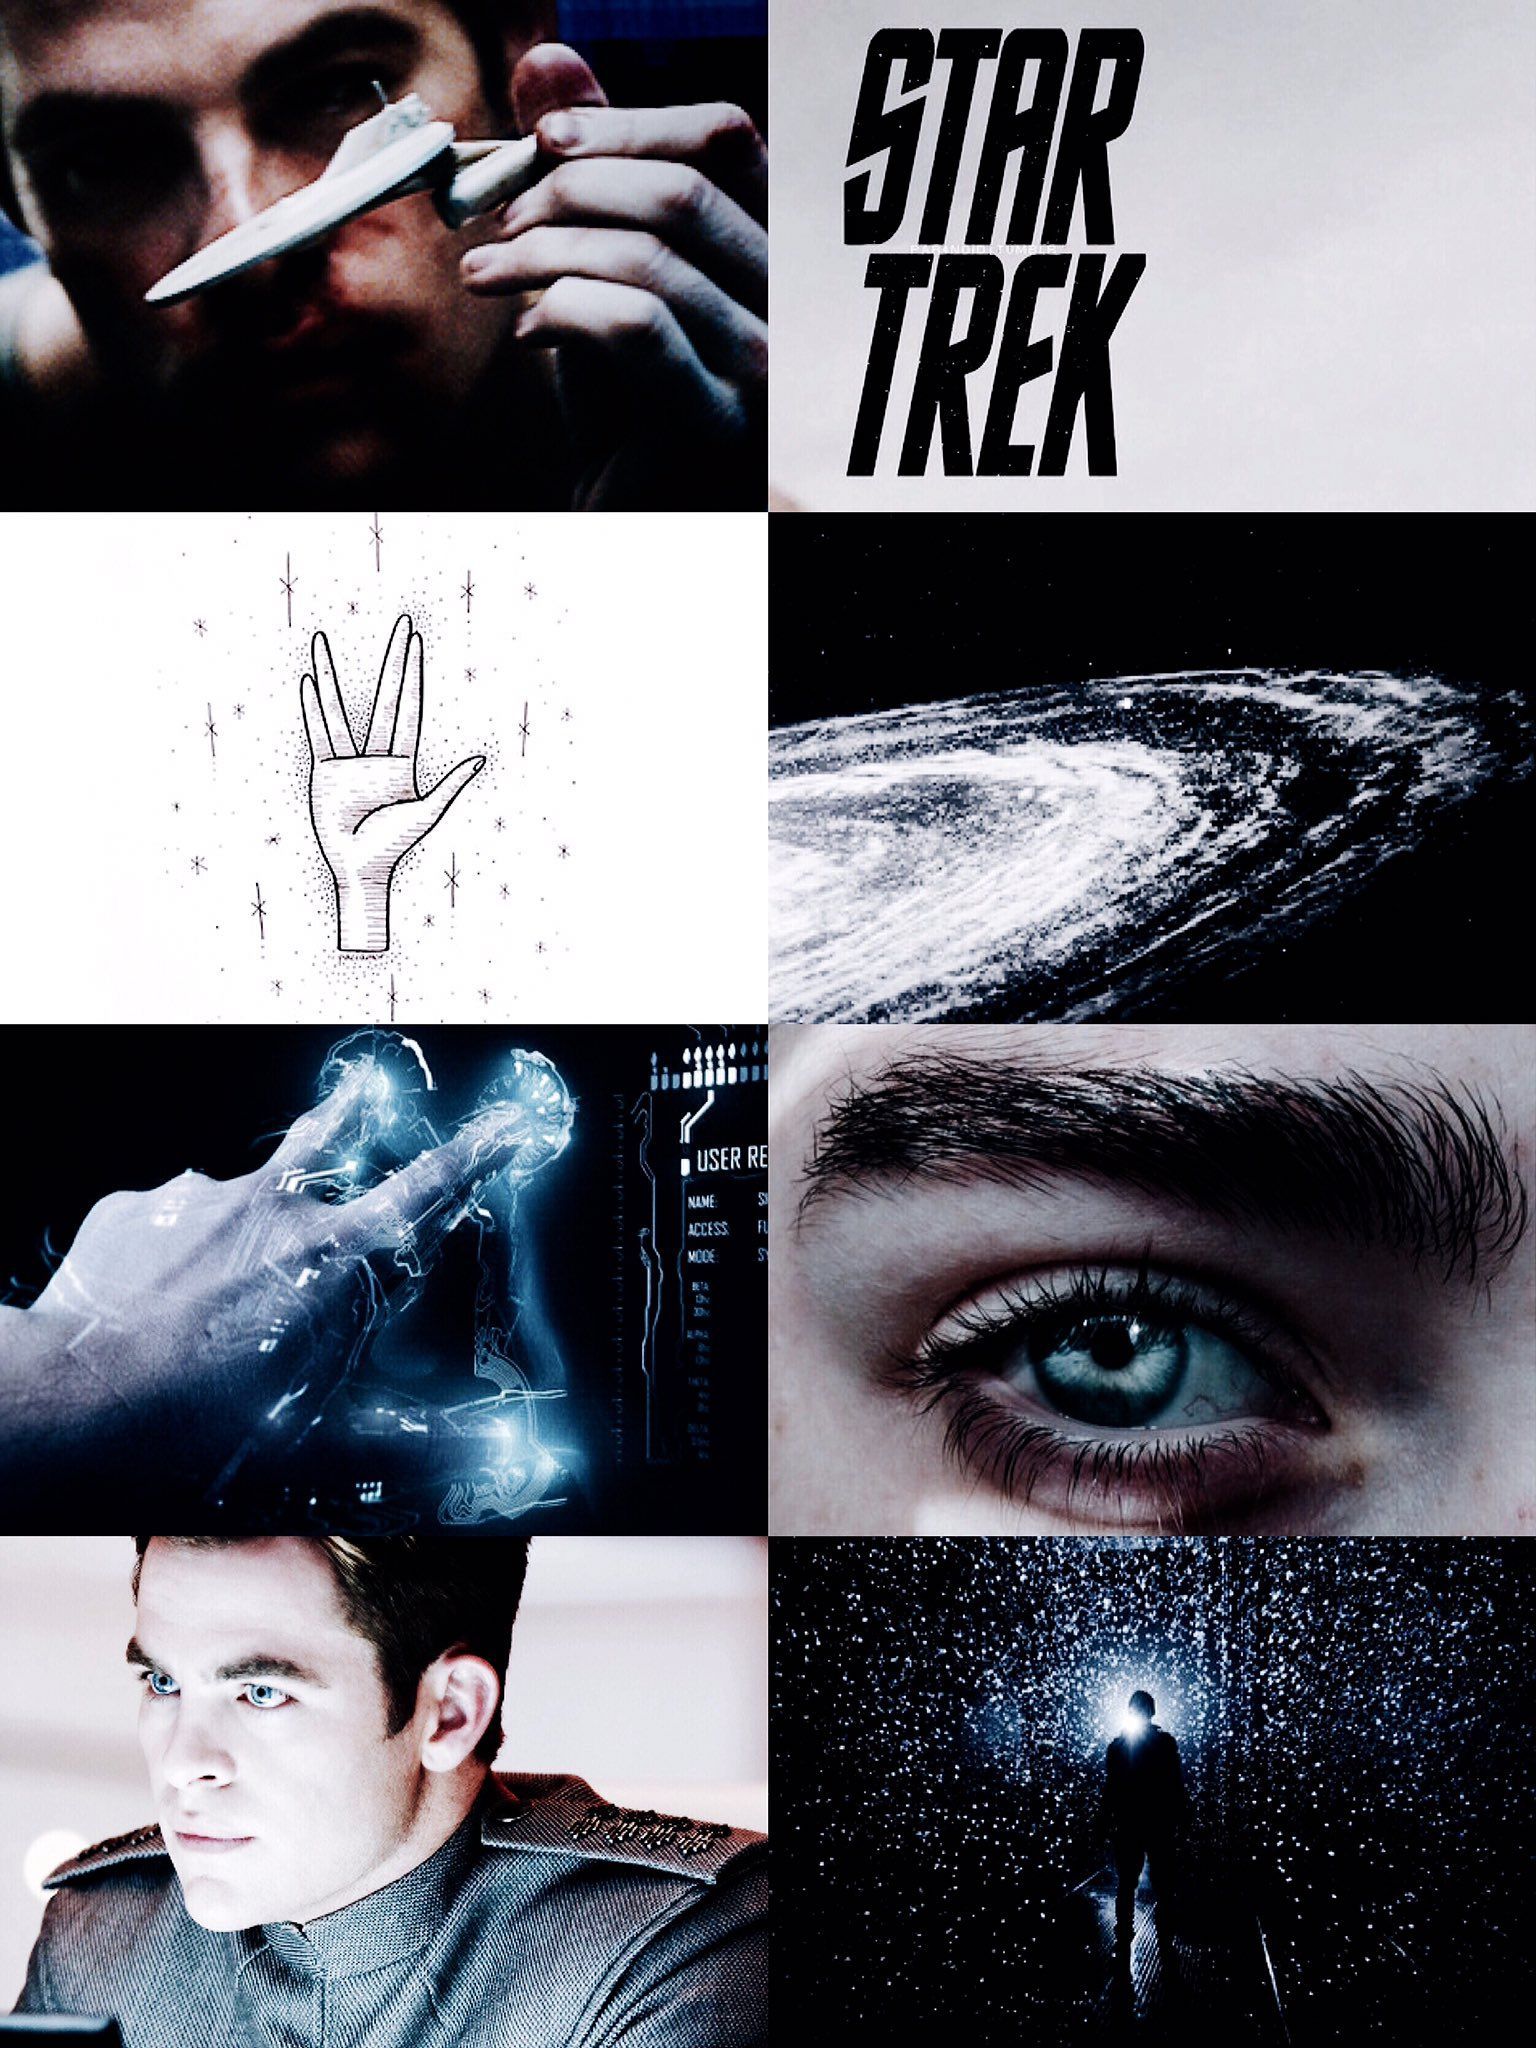 Aesthetic for Spock, the logical and intelligent half-Vulcan first officer of the USS Enterprise. - Star Trek, collage